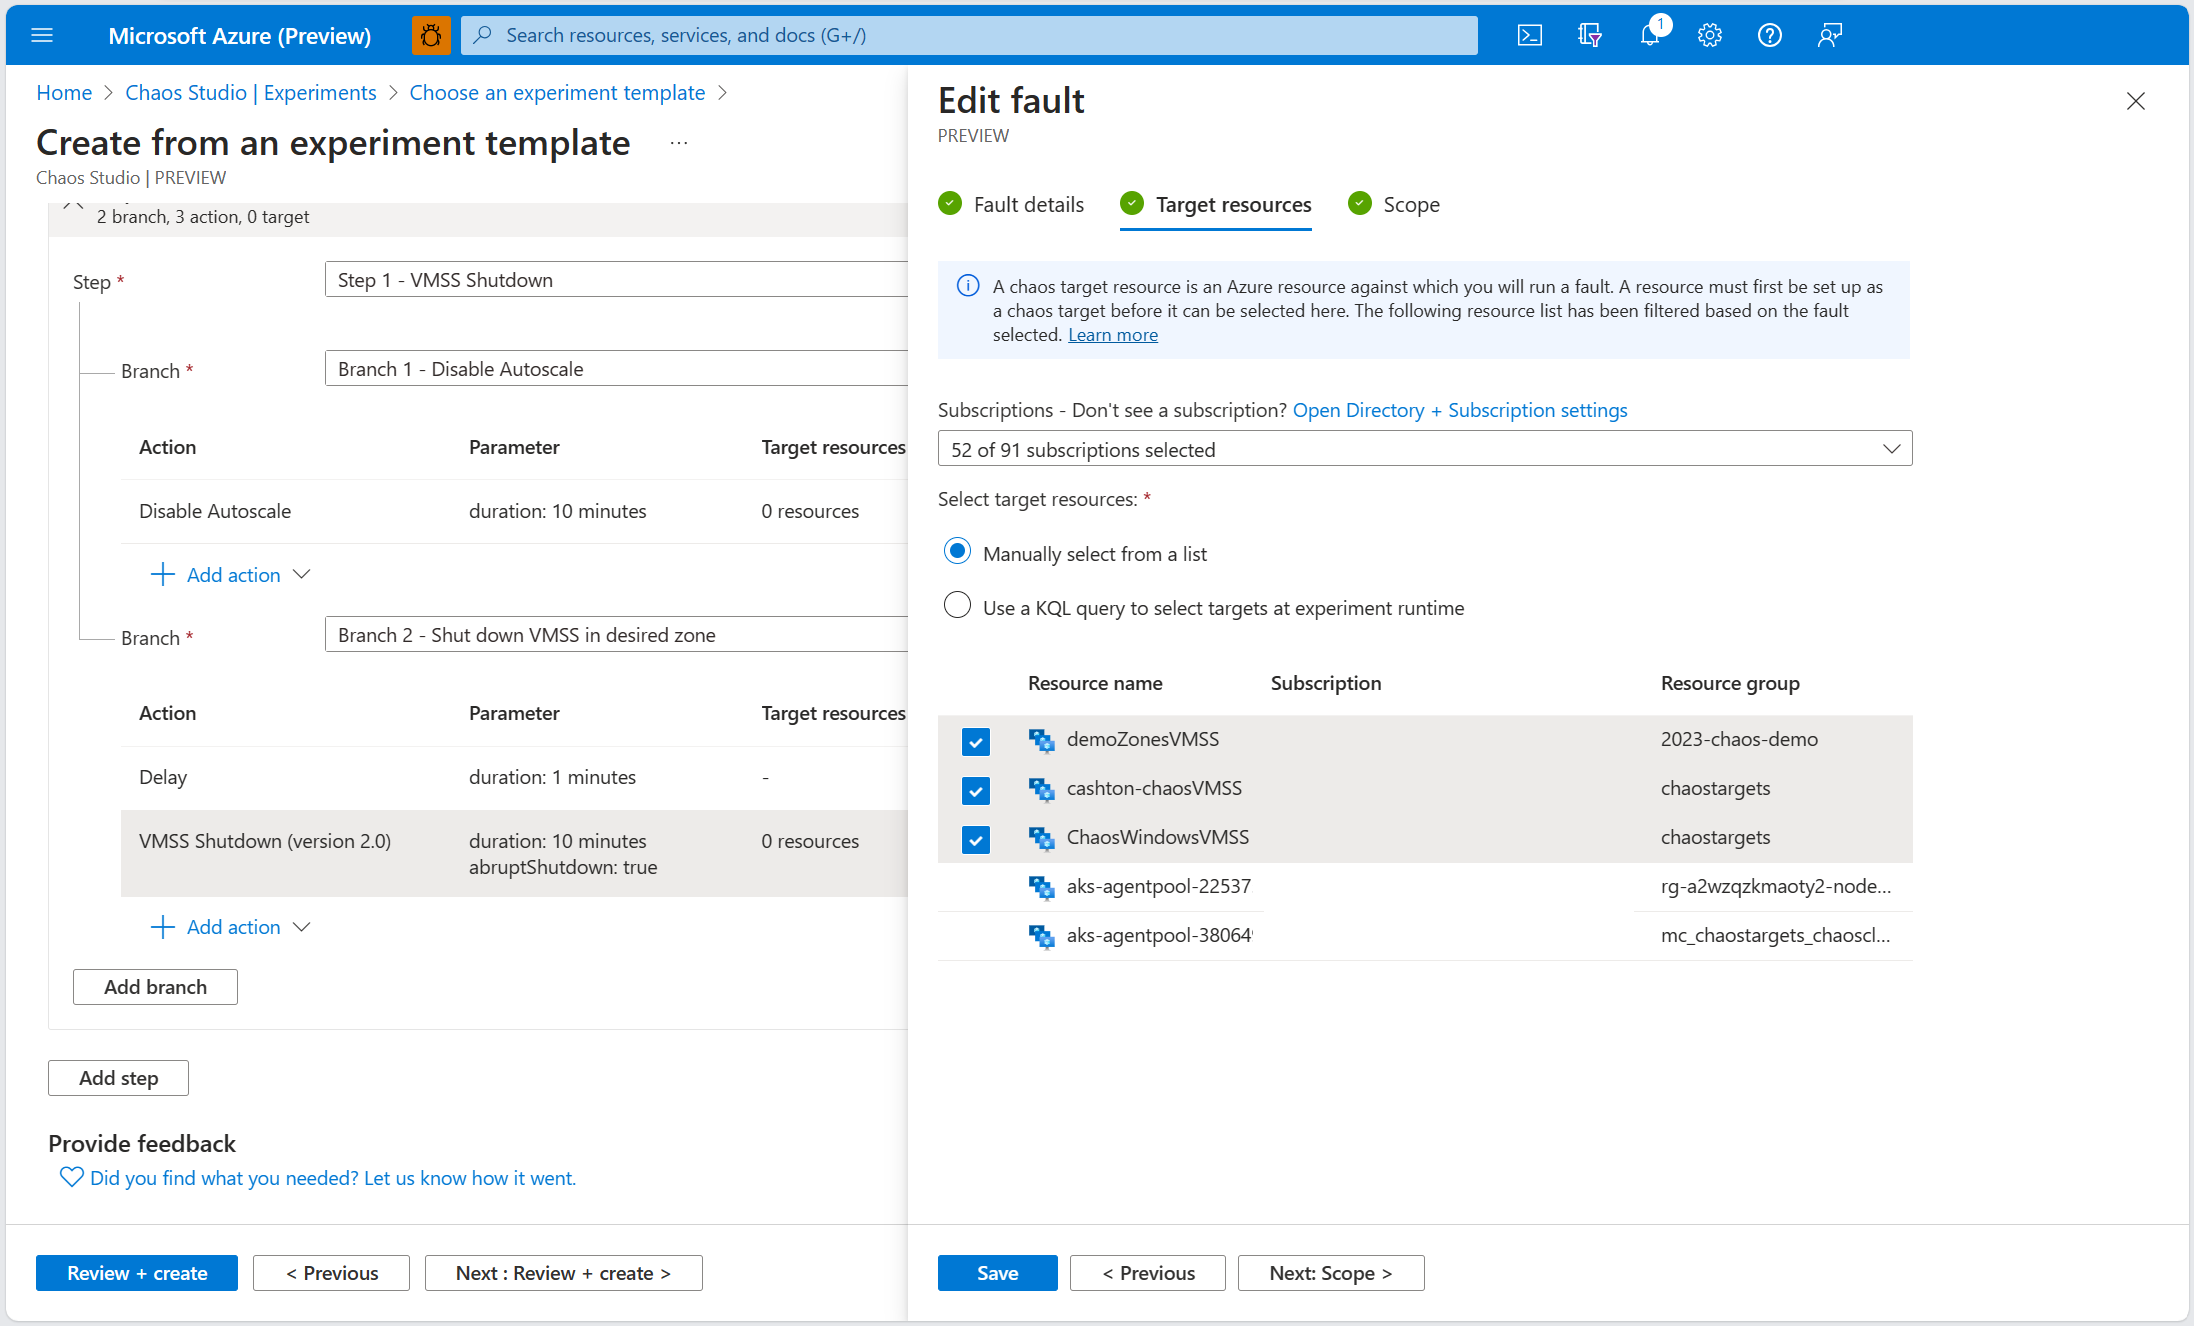 Screenshot that shows the list-based manual target selection option in the Azure portal.